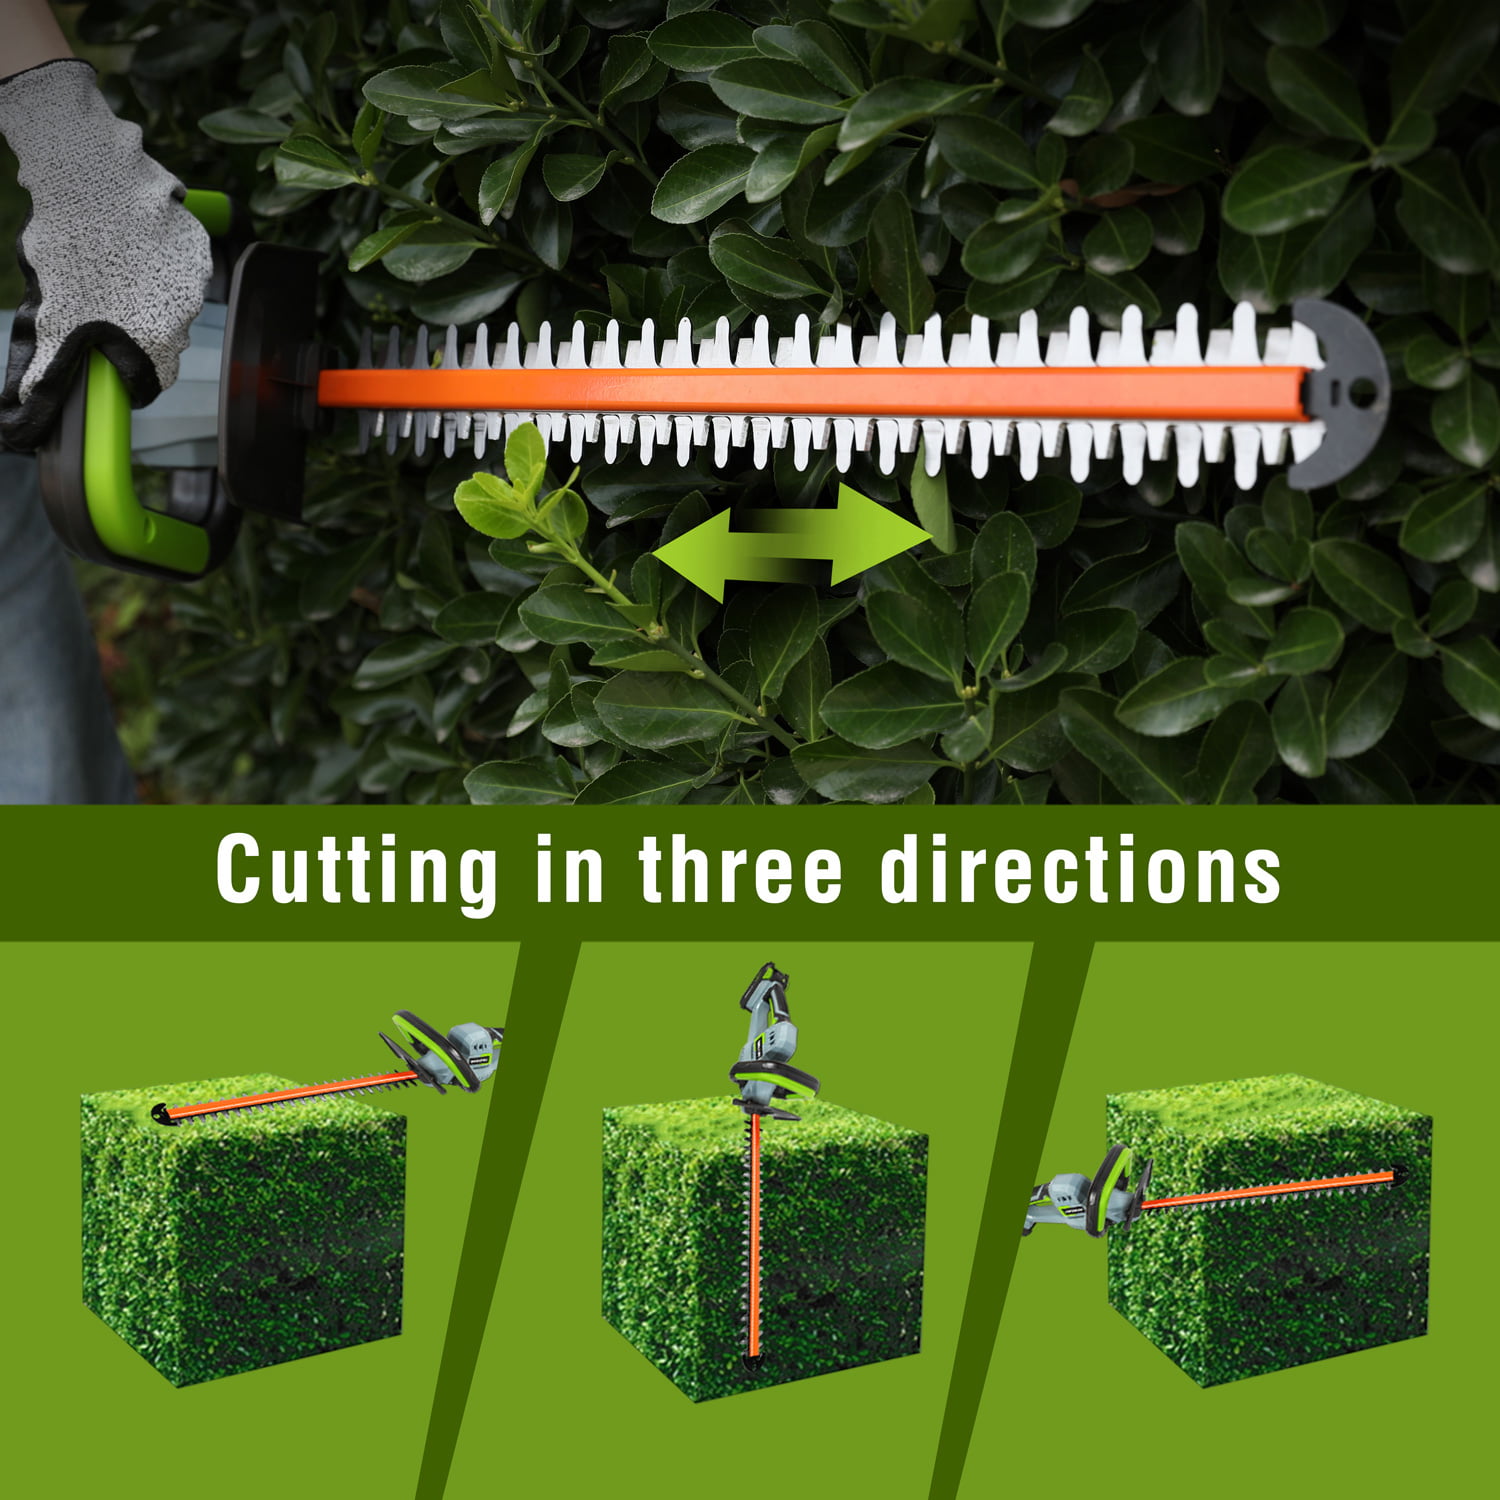 WORKSITE 20V Cordless Hedge Trimmer Cutter Battery Power Garden Tools Grass  Tree Leaf Handy Hedge Trimmer 2400RPM,Lawn & Garden Tools